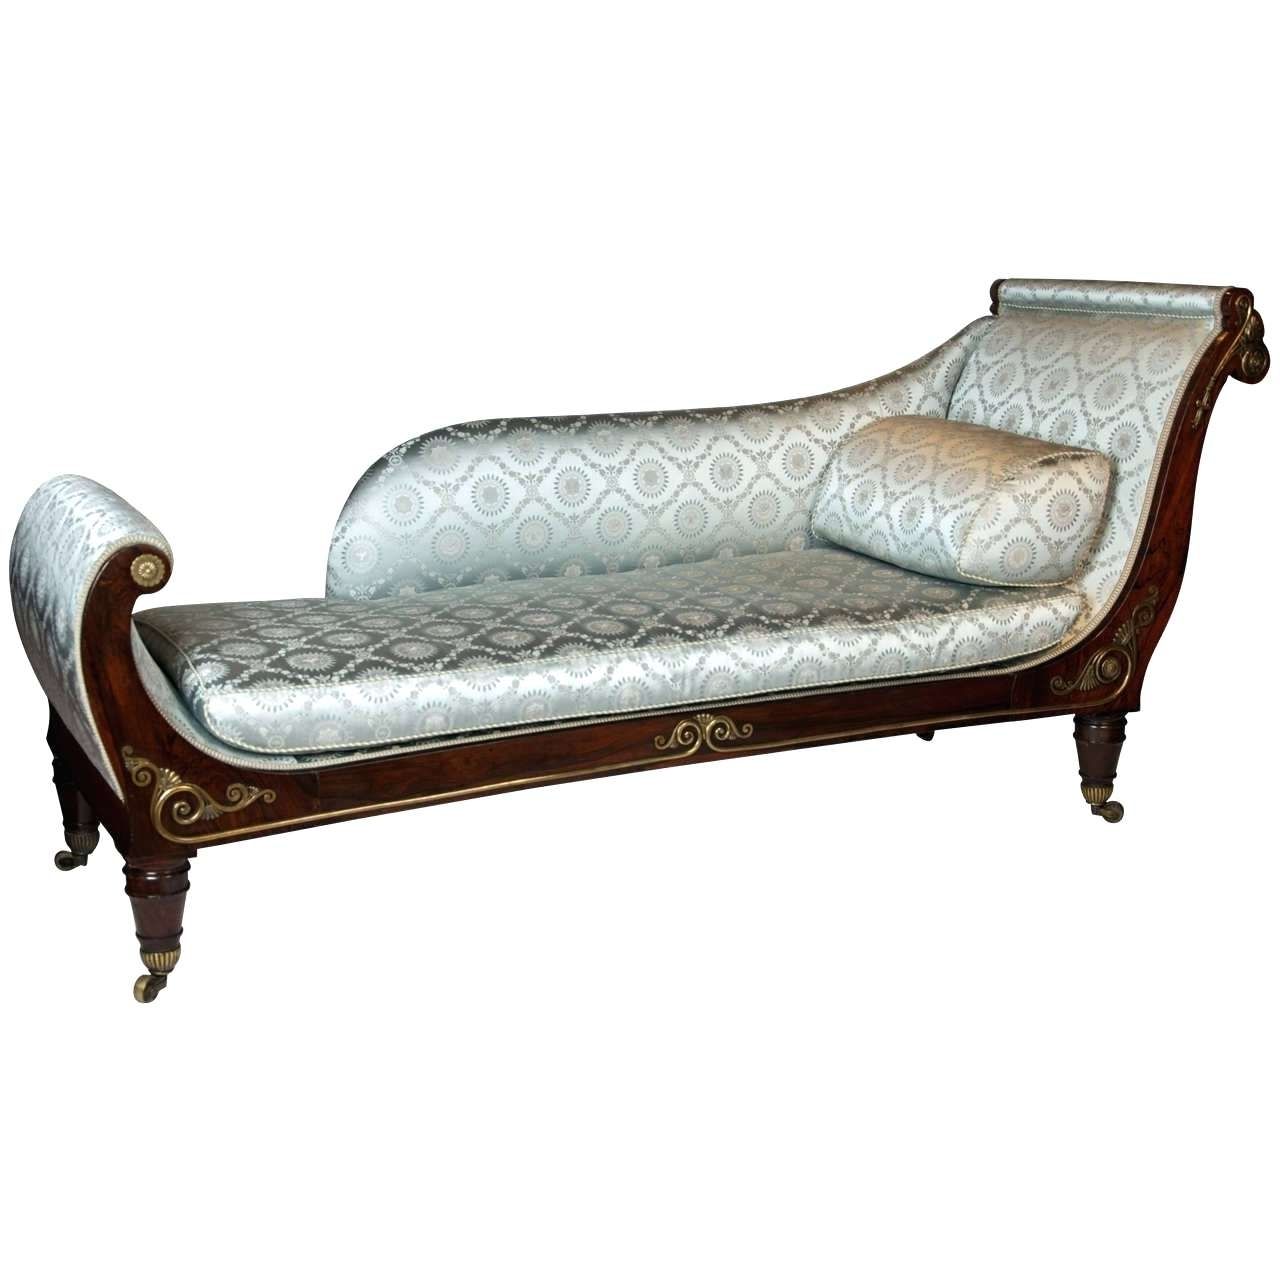 Widely Used Antique Wicker Chaise Lounge Chair • Lounge Chairs Ideas In Vintage Indoor Chaise Lounge Chairs (View 8 of 15)